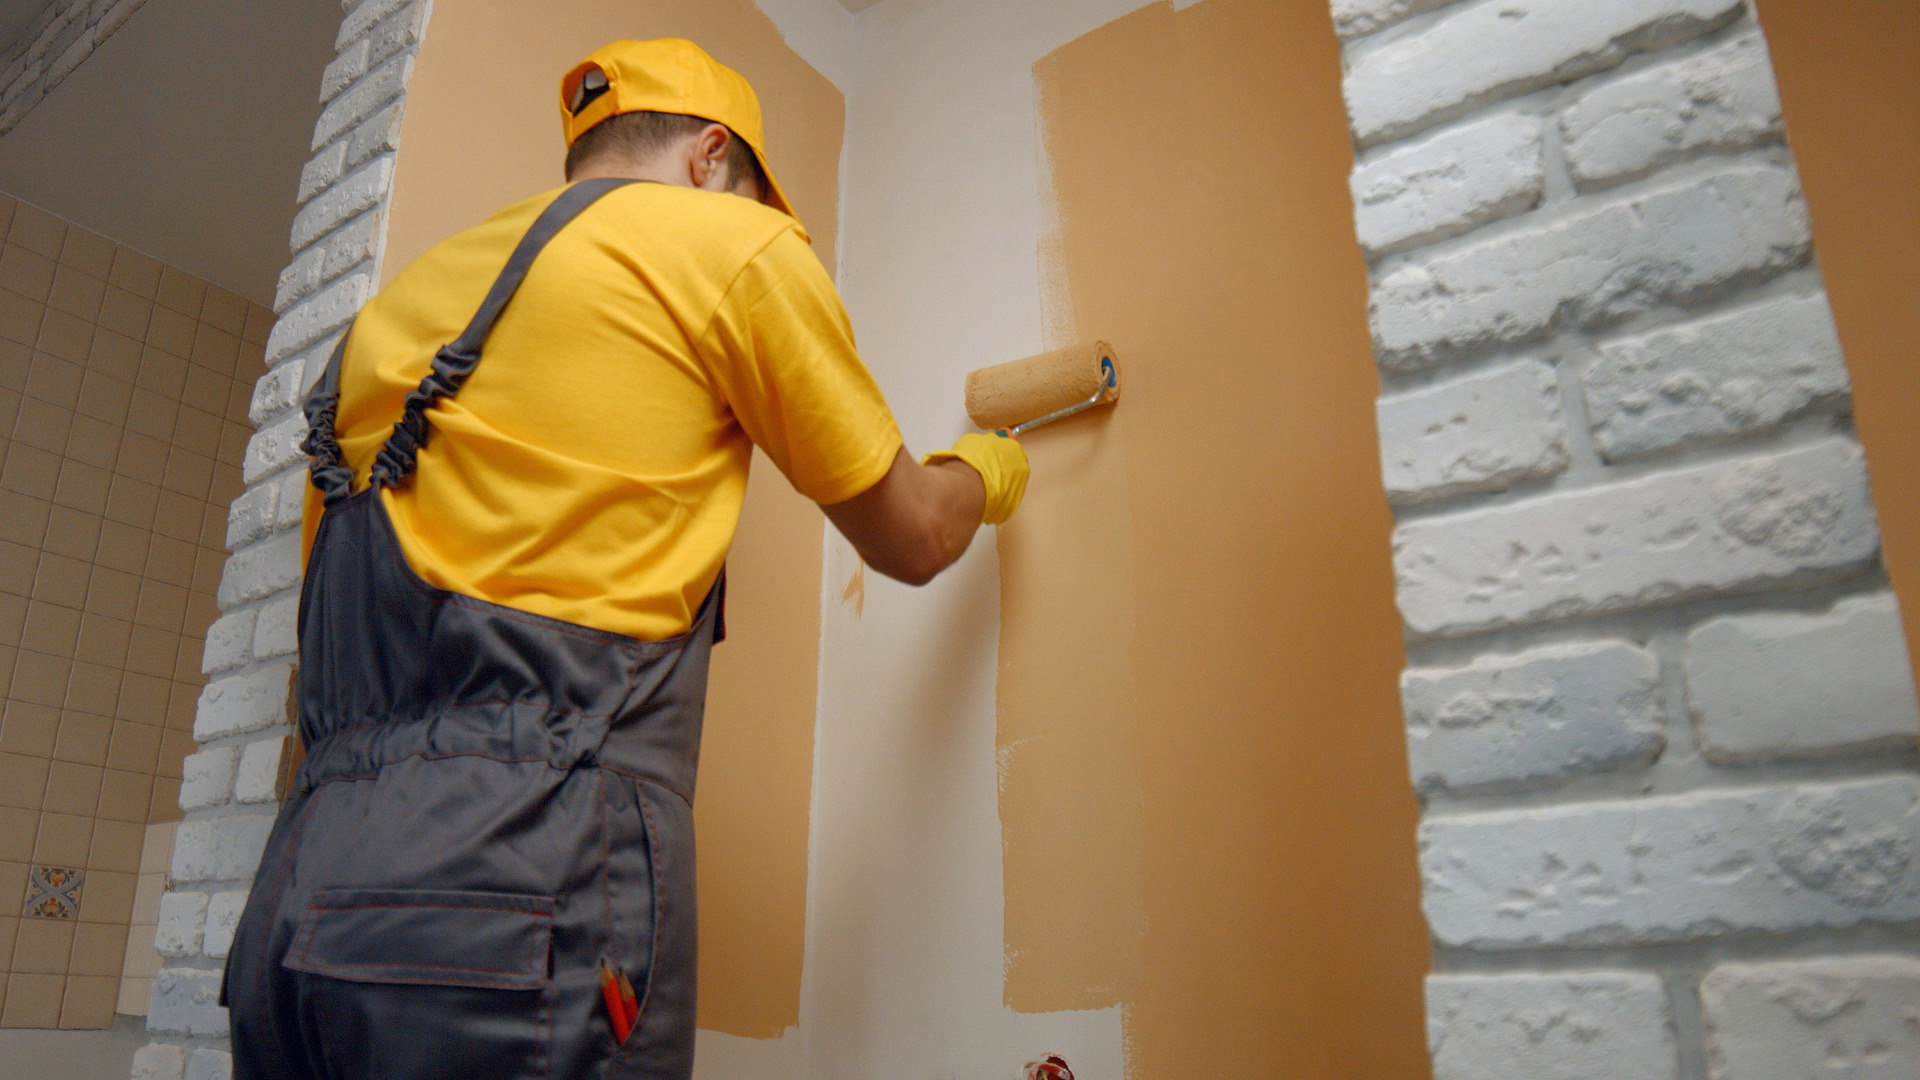 Transform Any Room in the Home with the Help of Paint